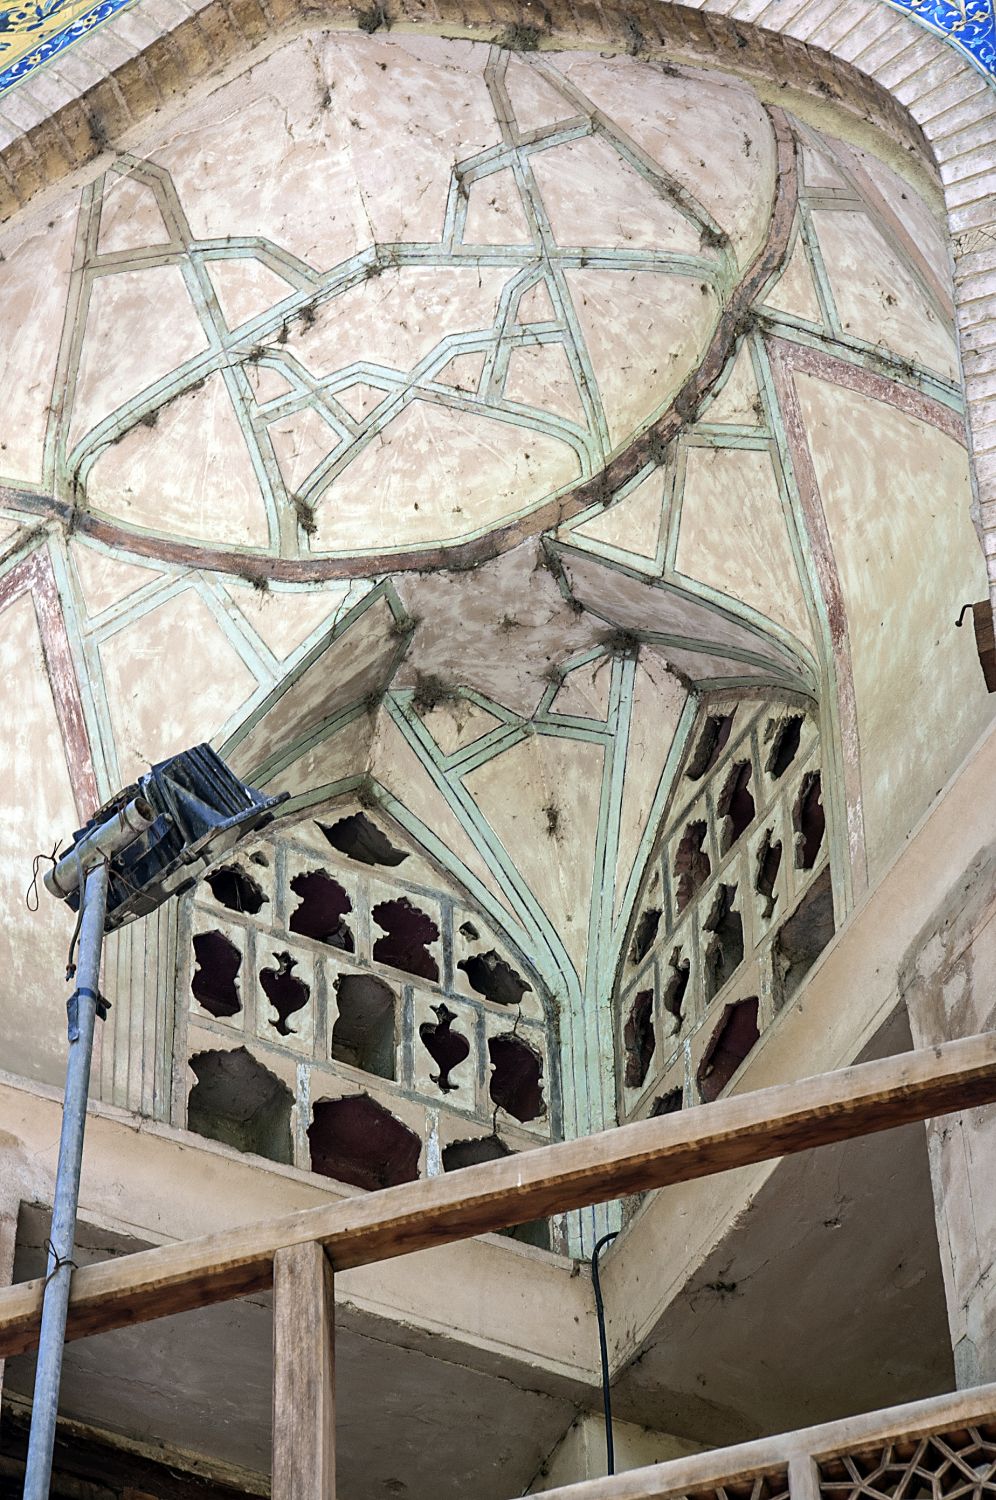 Northwest corner of building, view into the arched opening of a second floor gallery showing vault and perforated stucco niches.